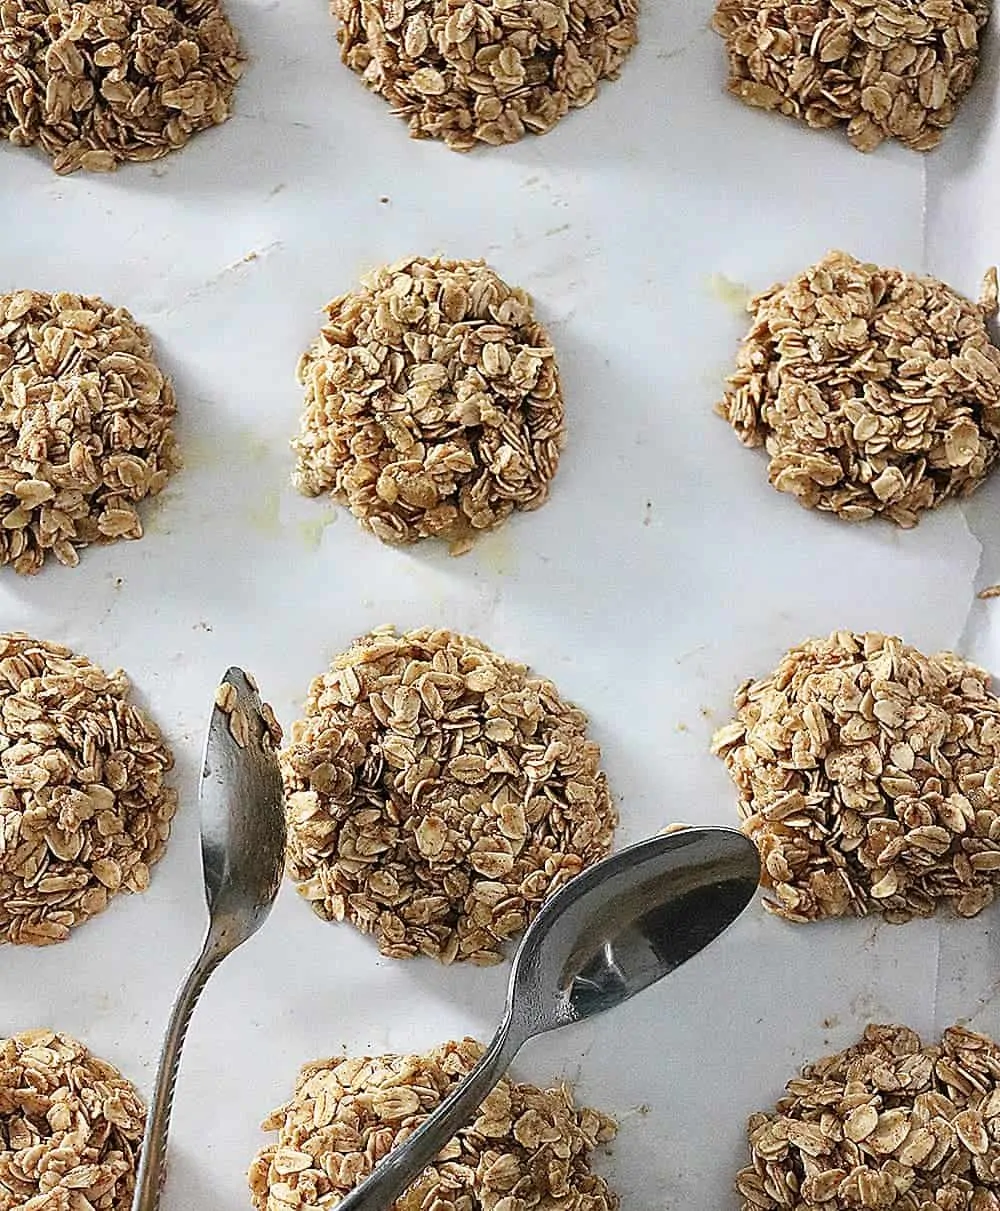 Ginger Granola Breakfast Cookies are a wonderful way to start the day. Oats, ginger, and plenty of cozy spices make 'em awesome.